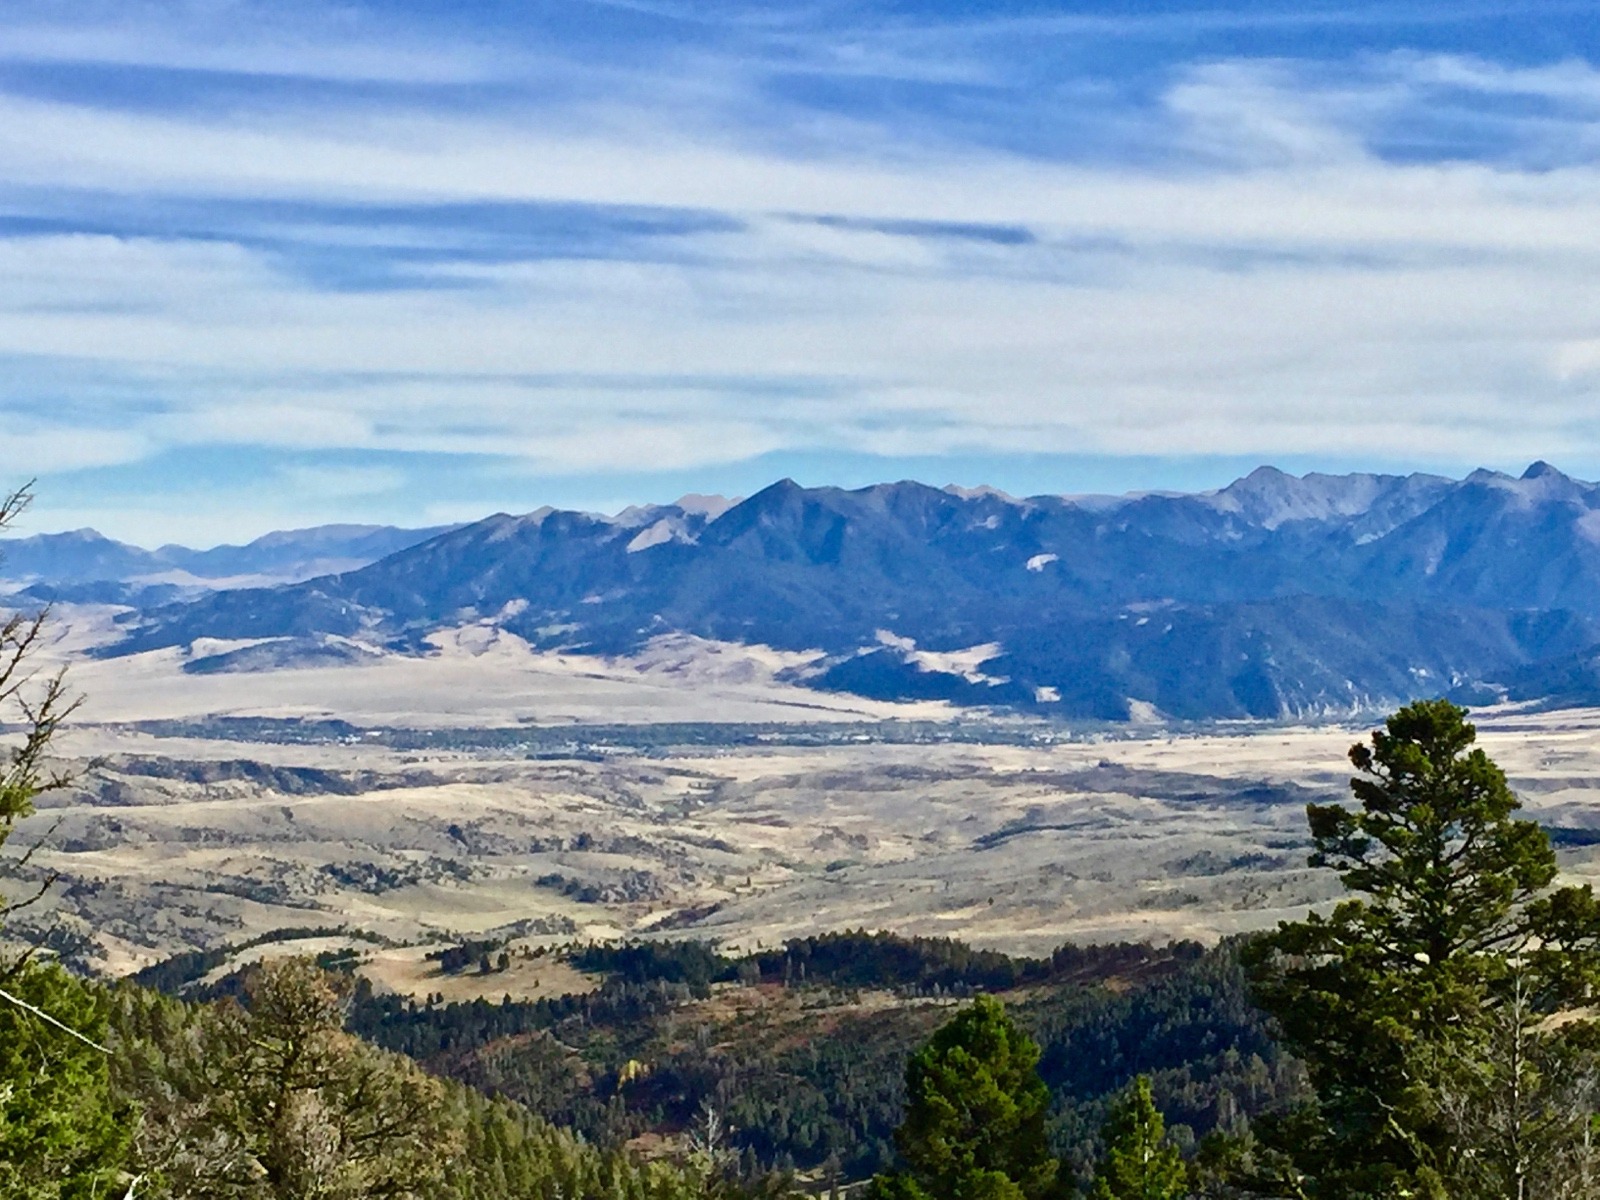 As viewed from the Bangtails looking east, the town of Livingston, Montana sits along the Yellowstone River at the northern terminus of the Absaroka mountains.  Today, Livingston and Park County are concerned about the spillover effects of population pressure coming from Gallatin County and Bozeman, one of the fastest growing micropolitan cities in the US.  The down-home character of Livingston and Paradise Valley are enhanced mightily by the pastoral countryside and public lands around it.  While some important conservation easements are in place, how would the feel of the community change were large-scale subdivisions to be approved and what would happen to the corridors of open space that provide passageways for migratory elk and mule deer? Photo by Todd Wilkinson